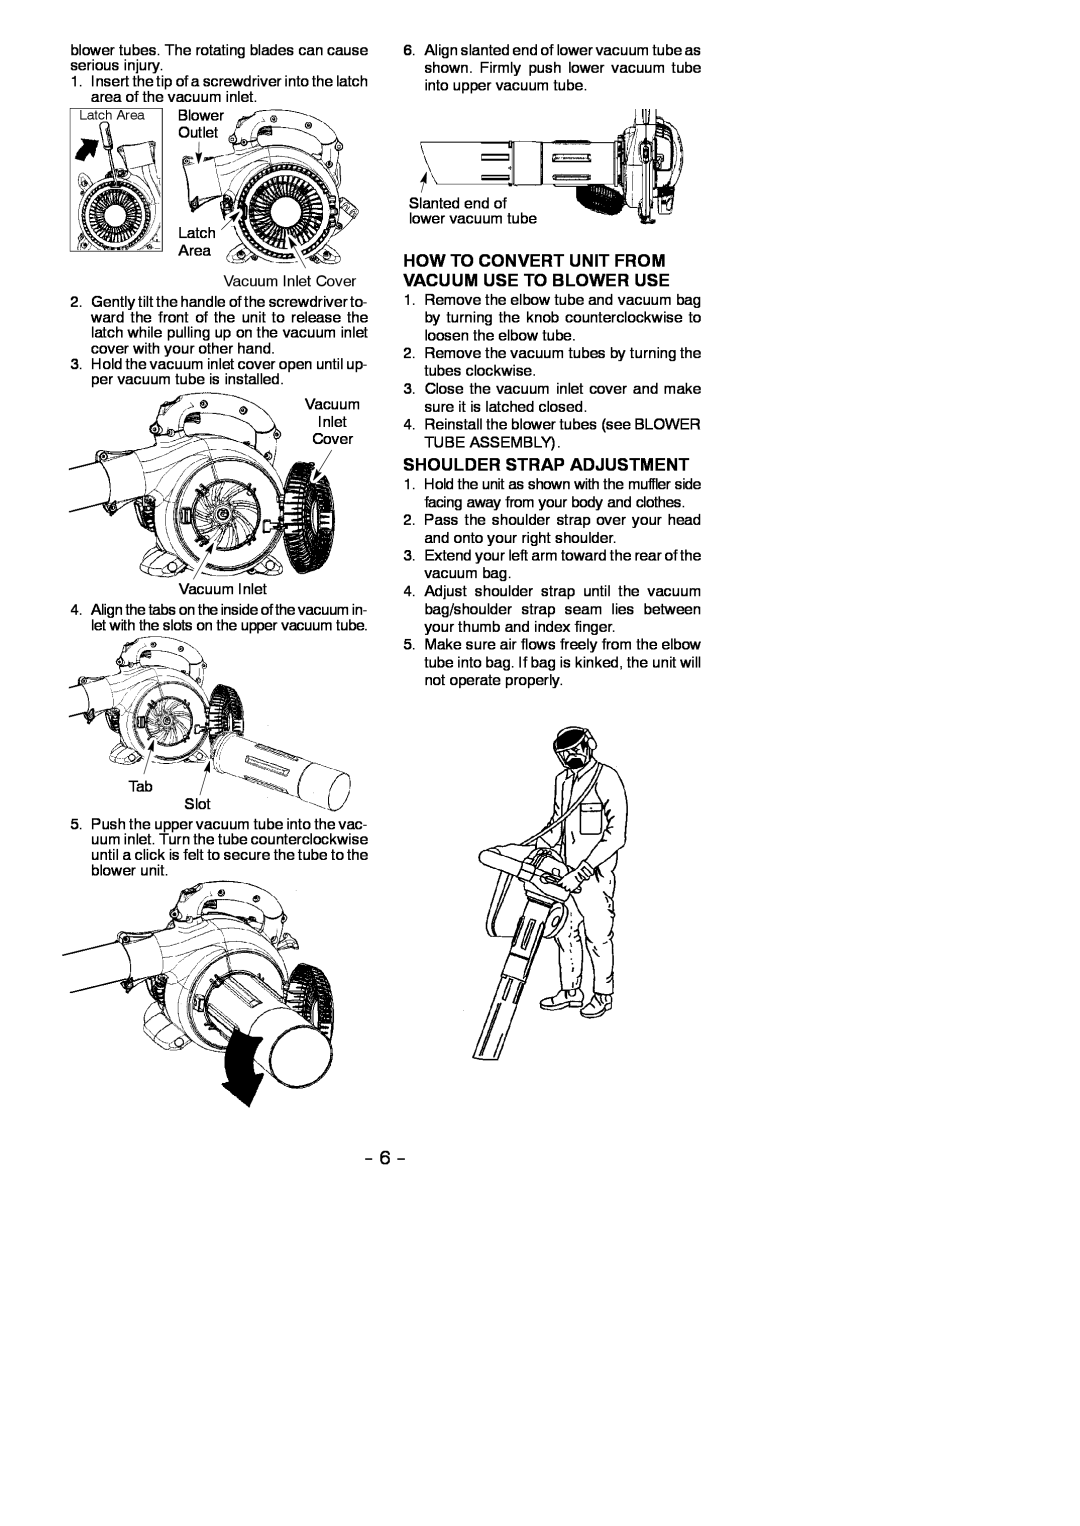 Poulan 952711904, 115350727 instruction manual How To Convert Unit From Vacuum Use To Blower Use, Shoulder Strap Adjustment 